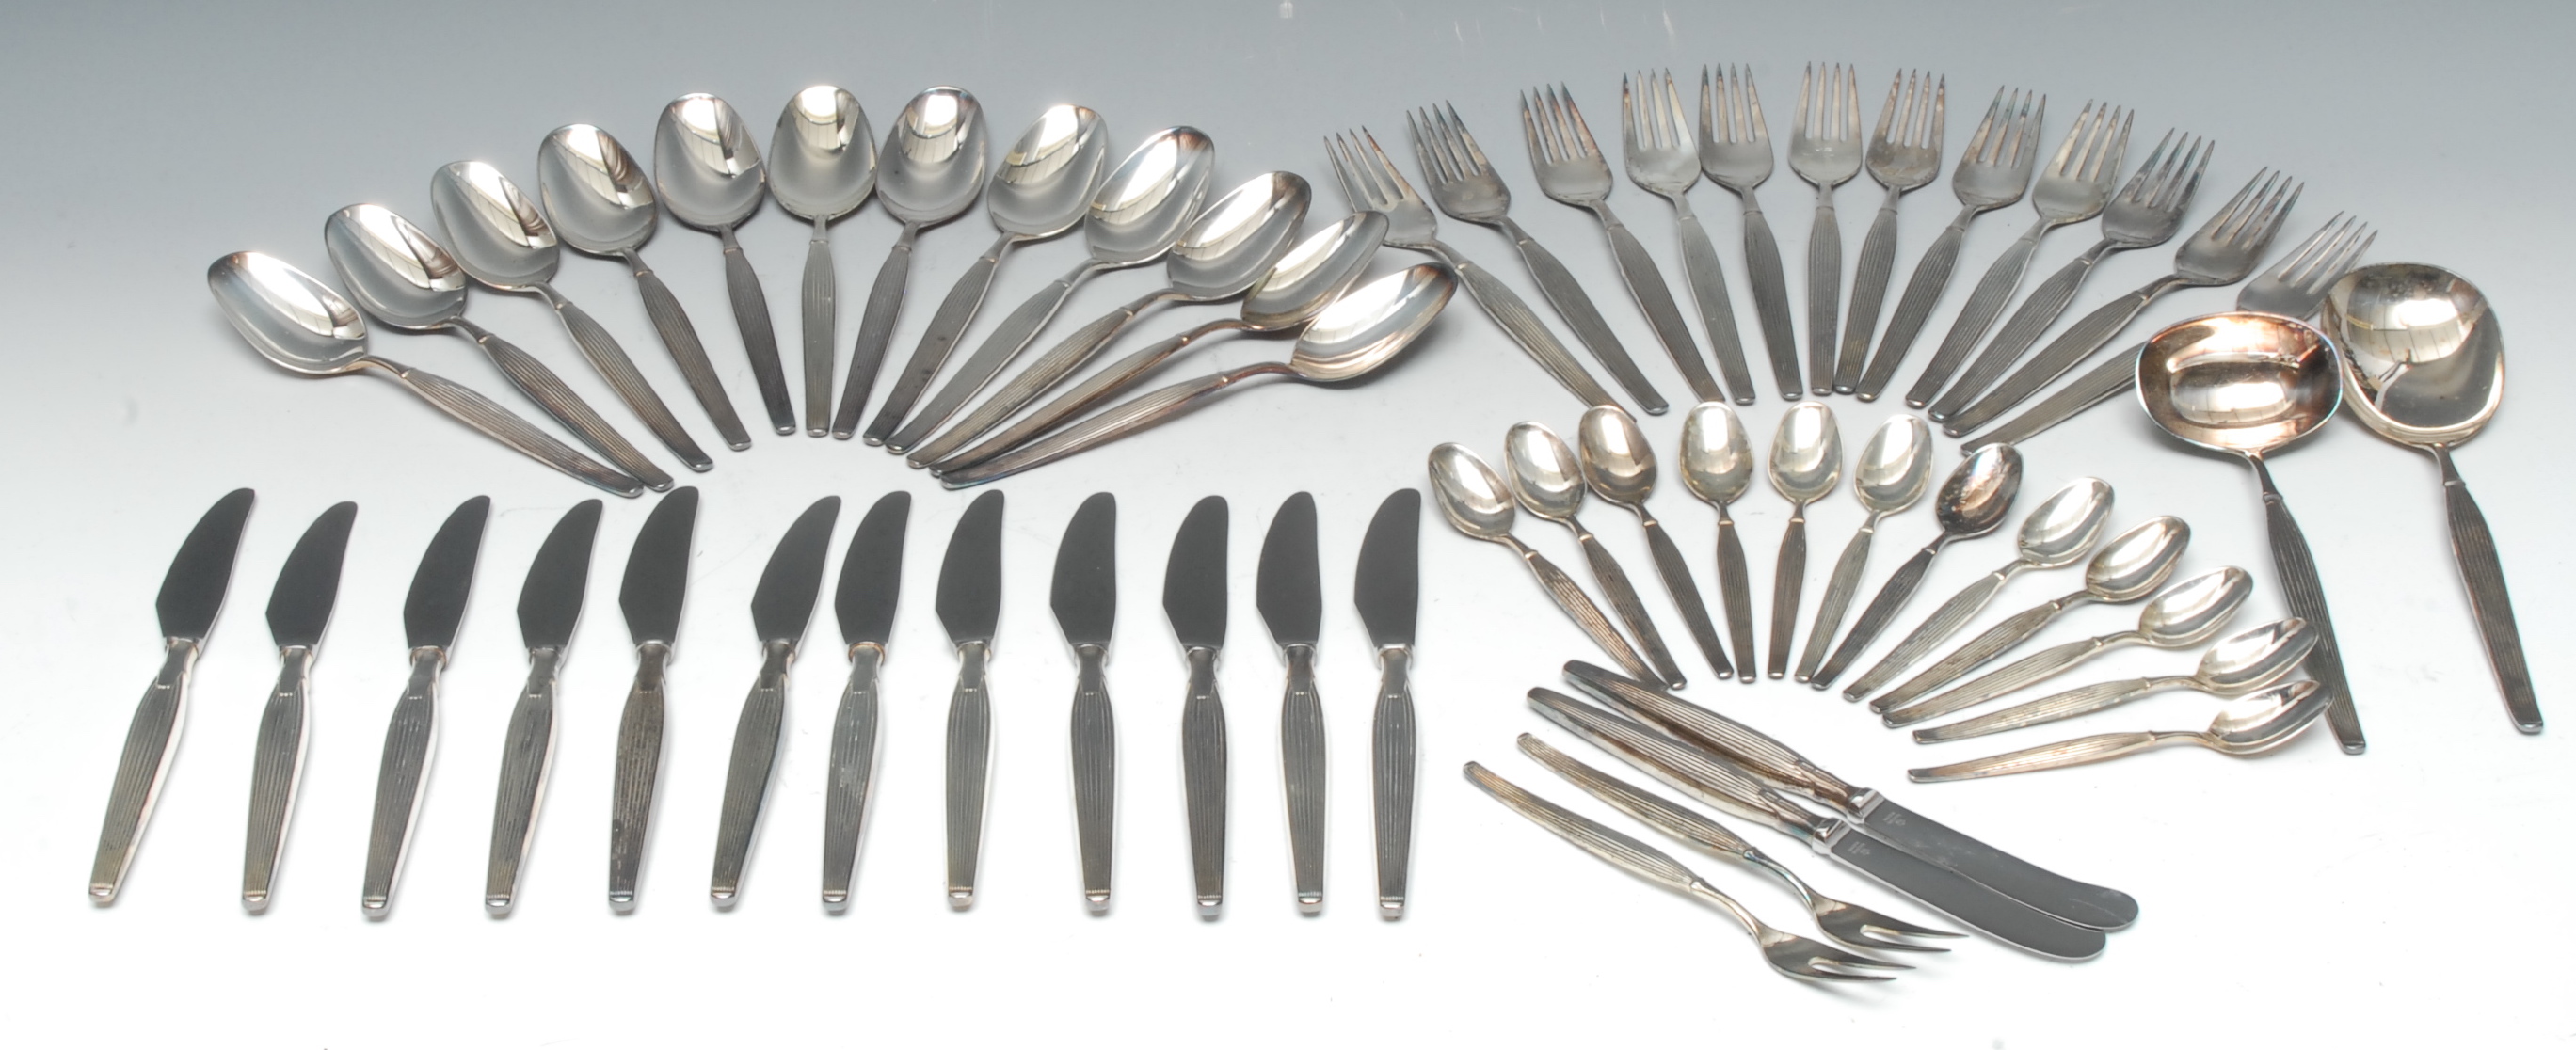 A vintage 1960s silver plated Savoy pattern cutlery set for twelve designed by Henning Seidelin for